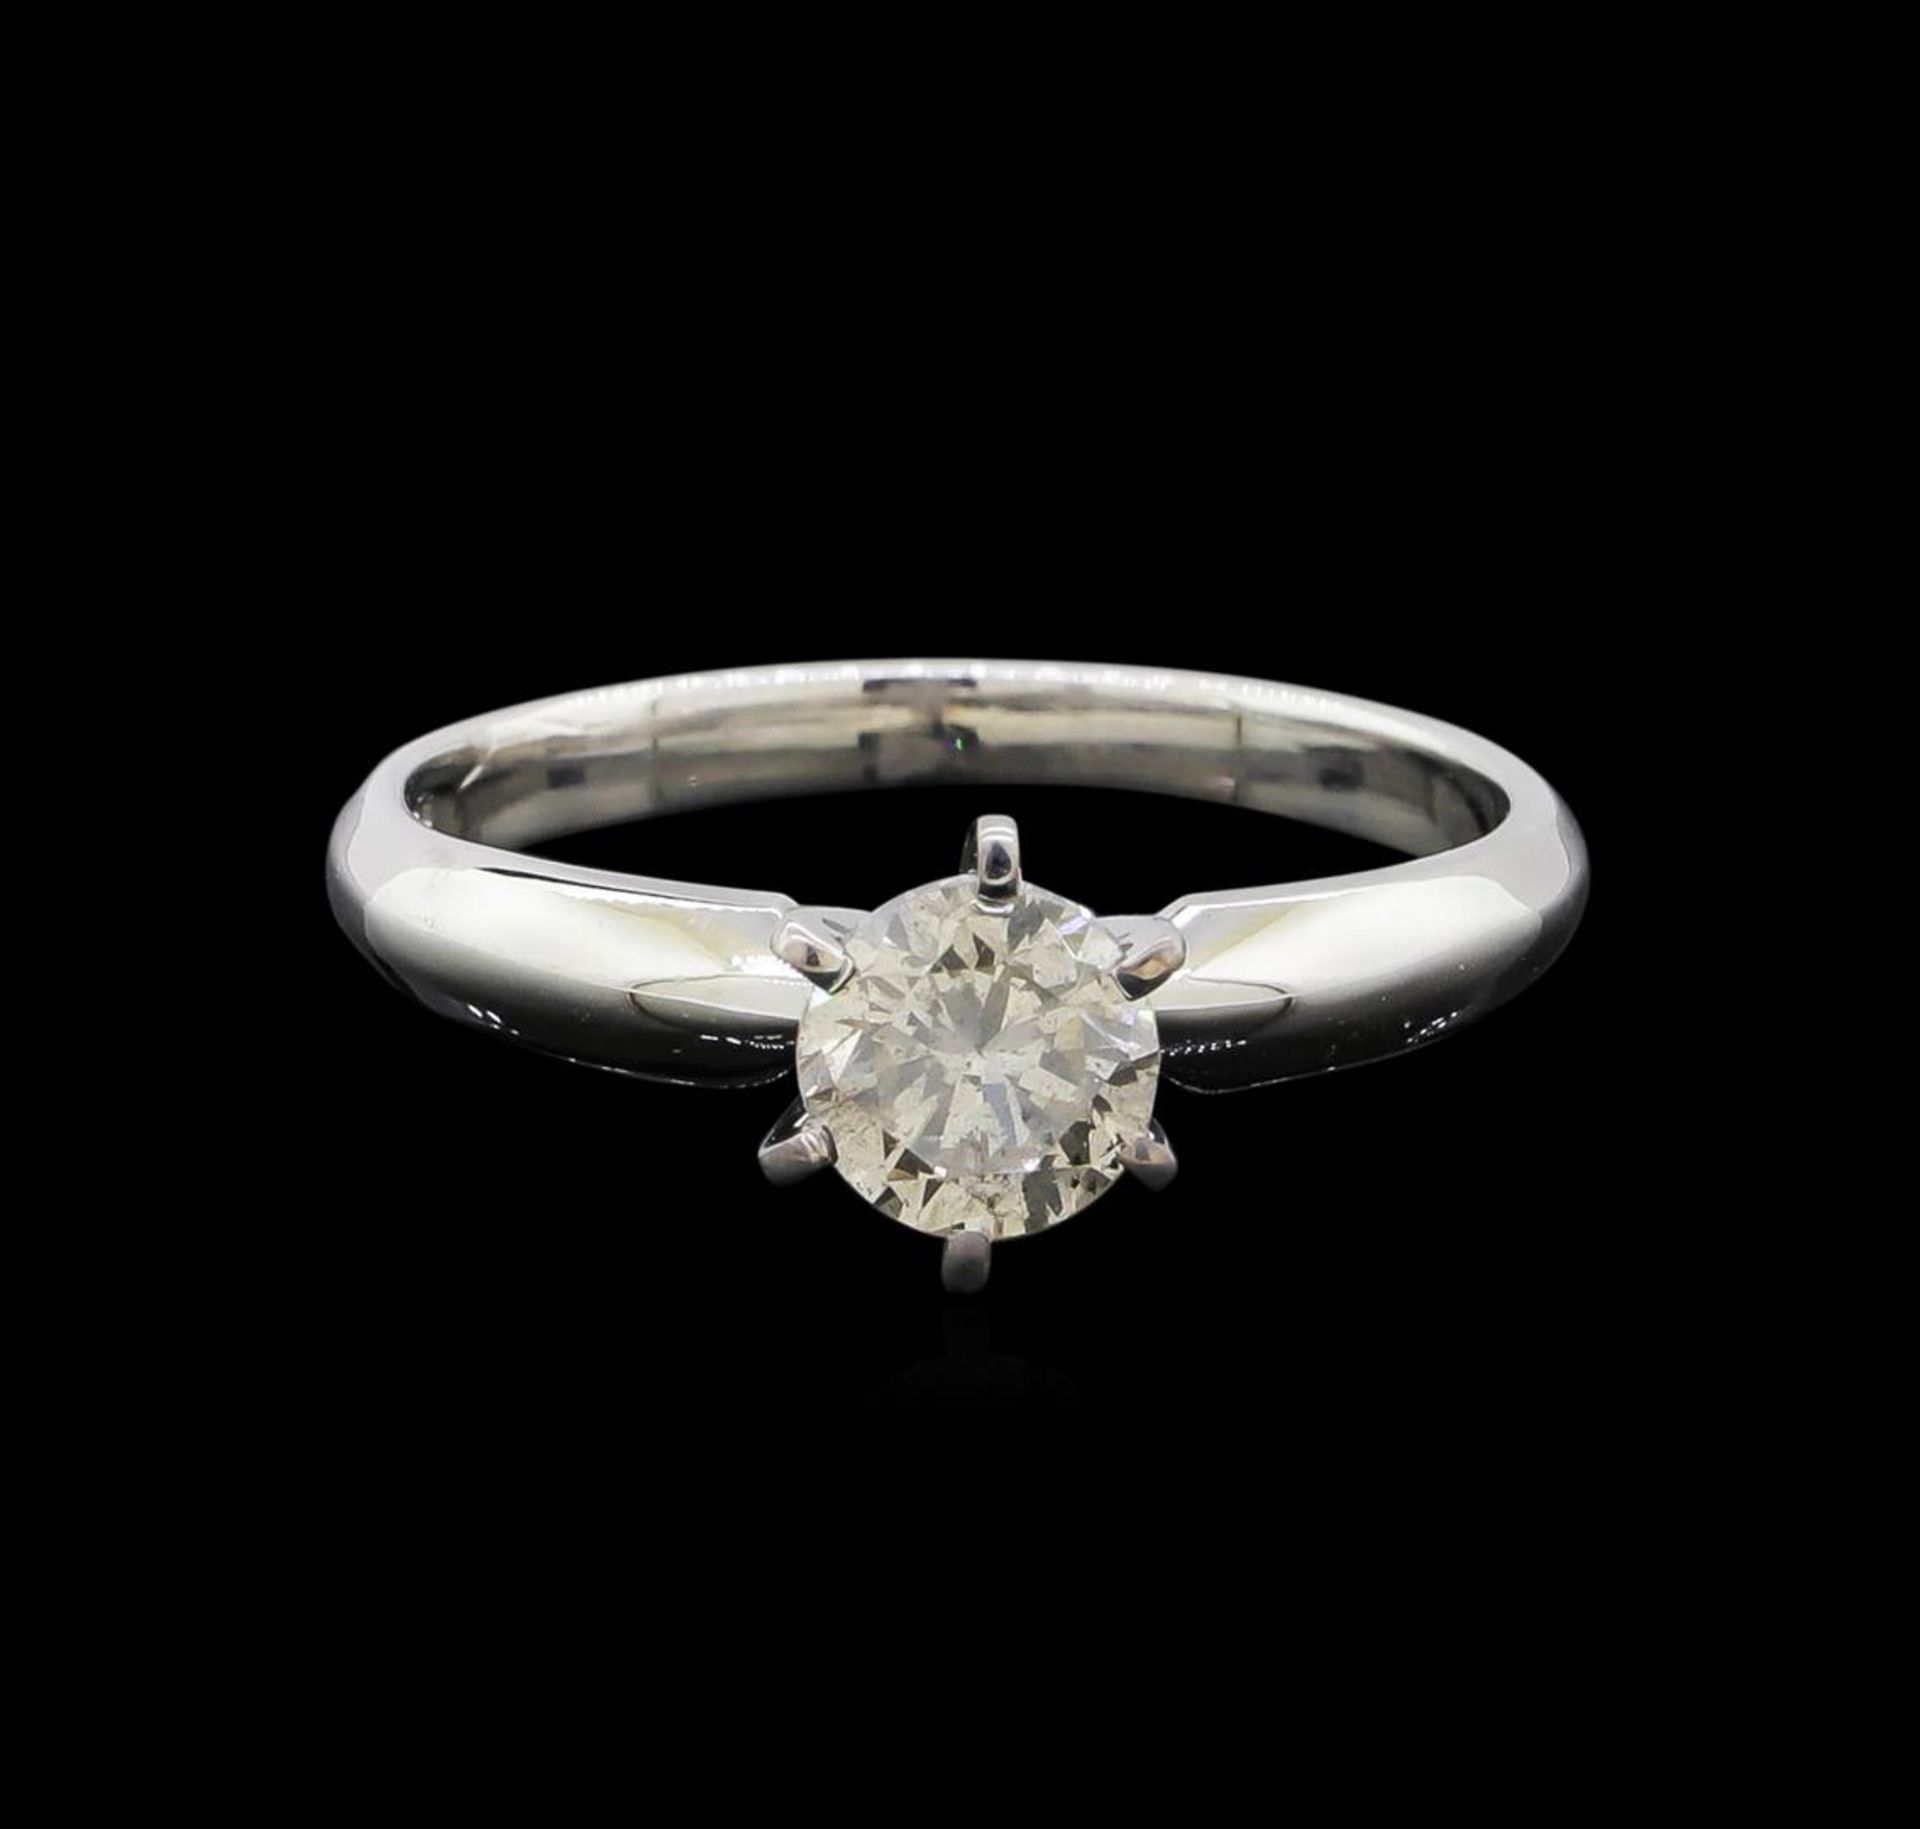 14KT White Gold 0.85 ctw Round Cut Diamond Solitaire Ring - Image 2 of 5